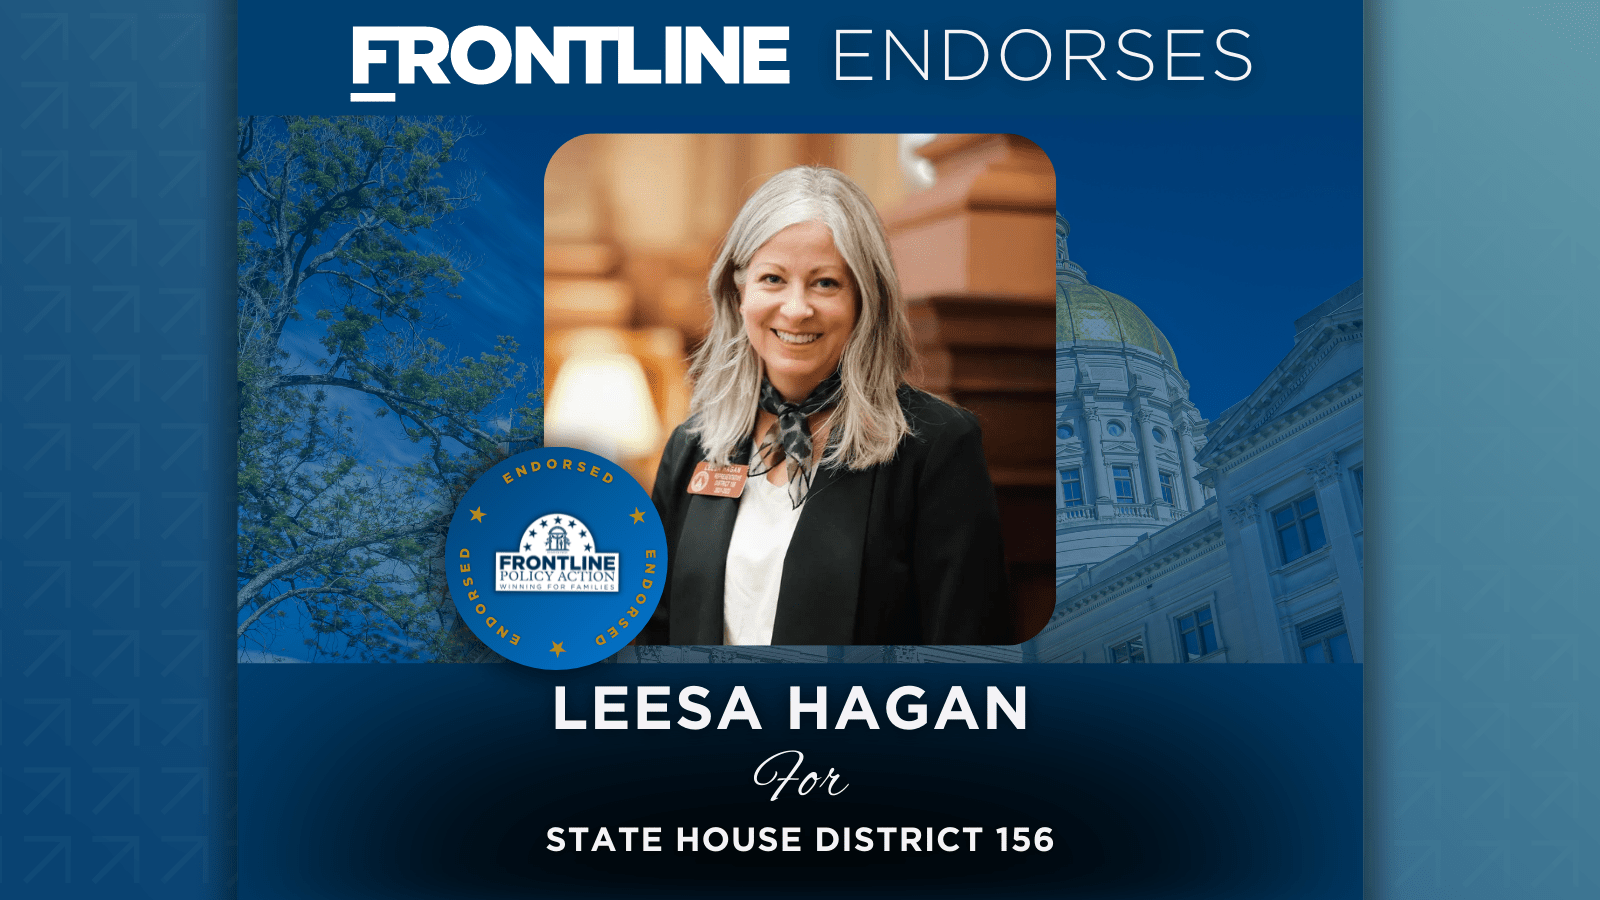 BREAKING: Frontline Endorses Leesa Hagan for State House District 156